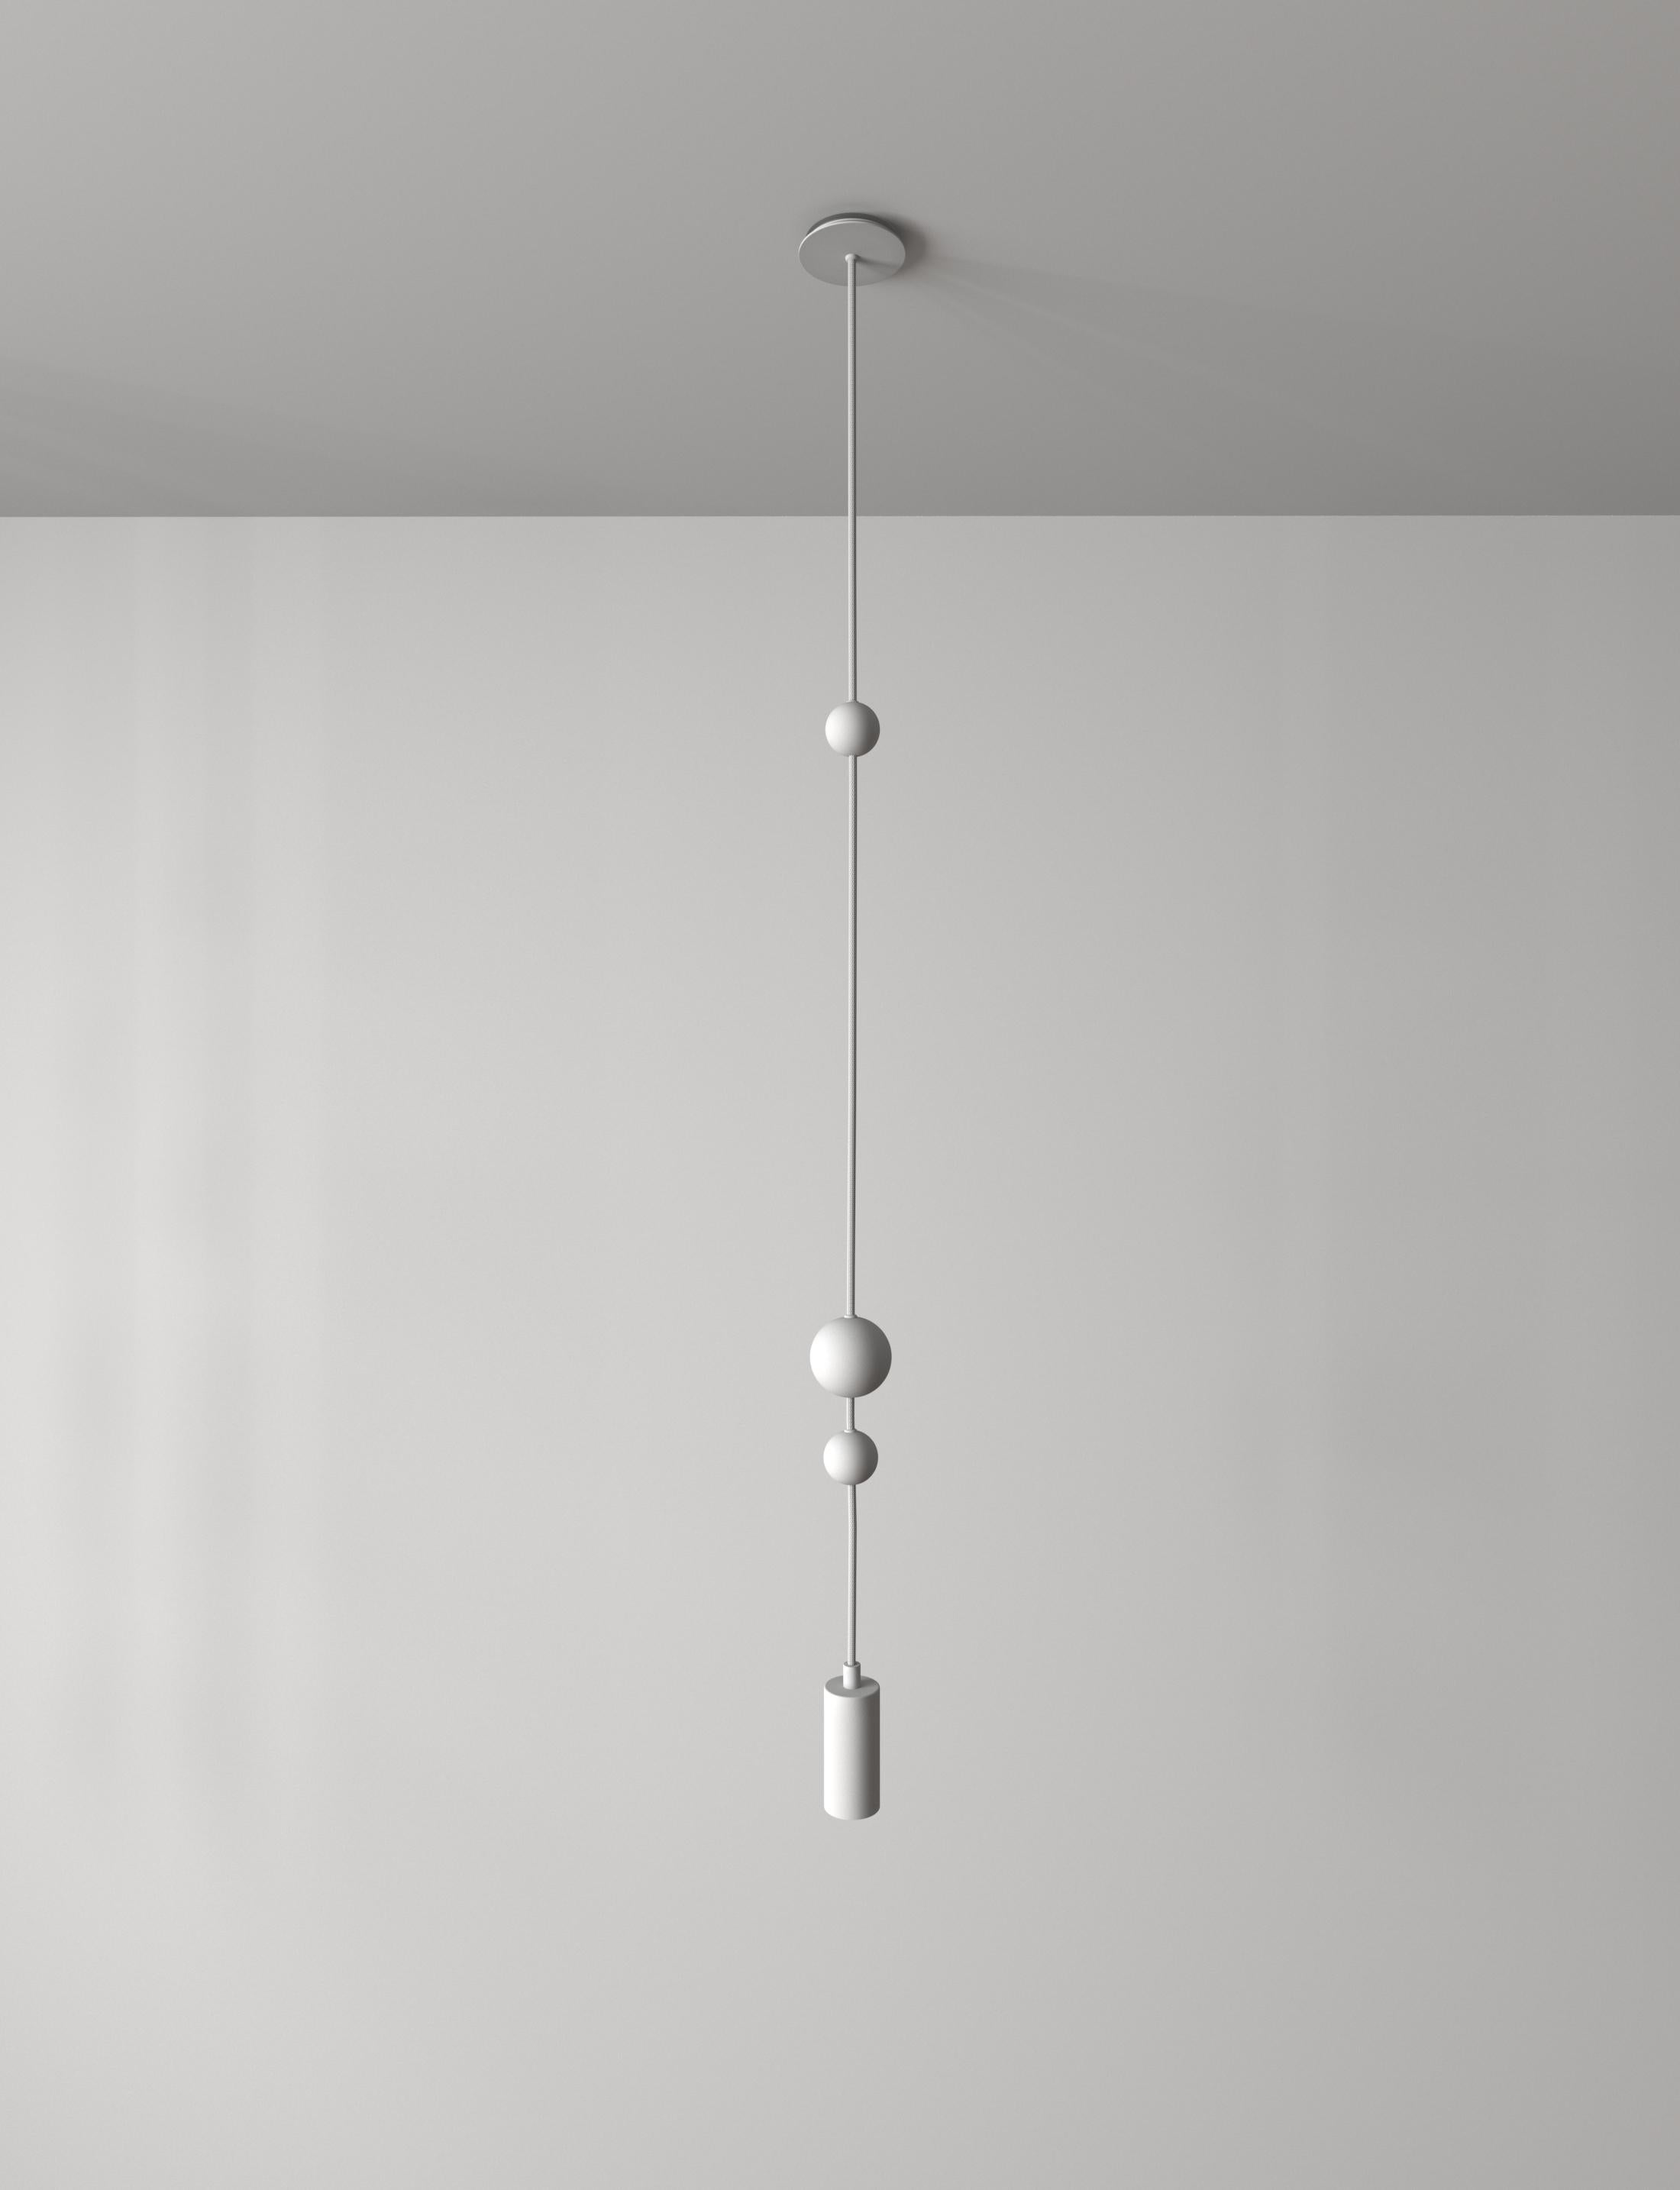 Hand-Crafted Pendant, One Spot, Modern Steel Chandelier For Sale